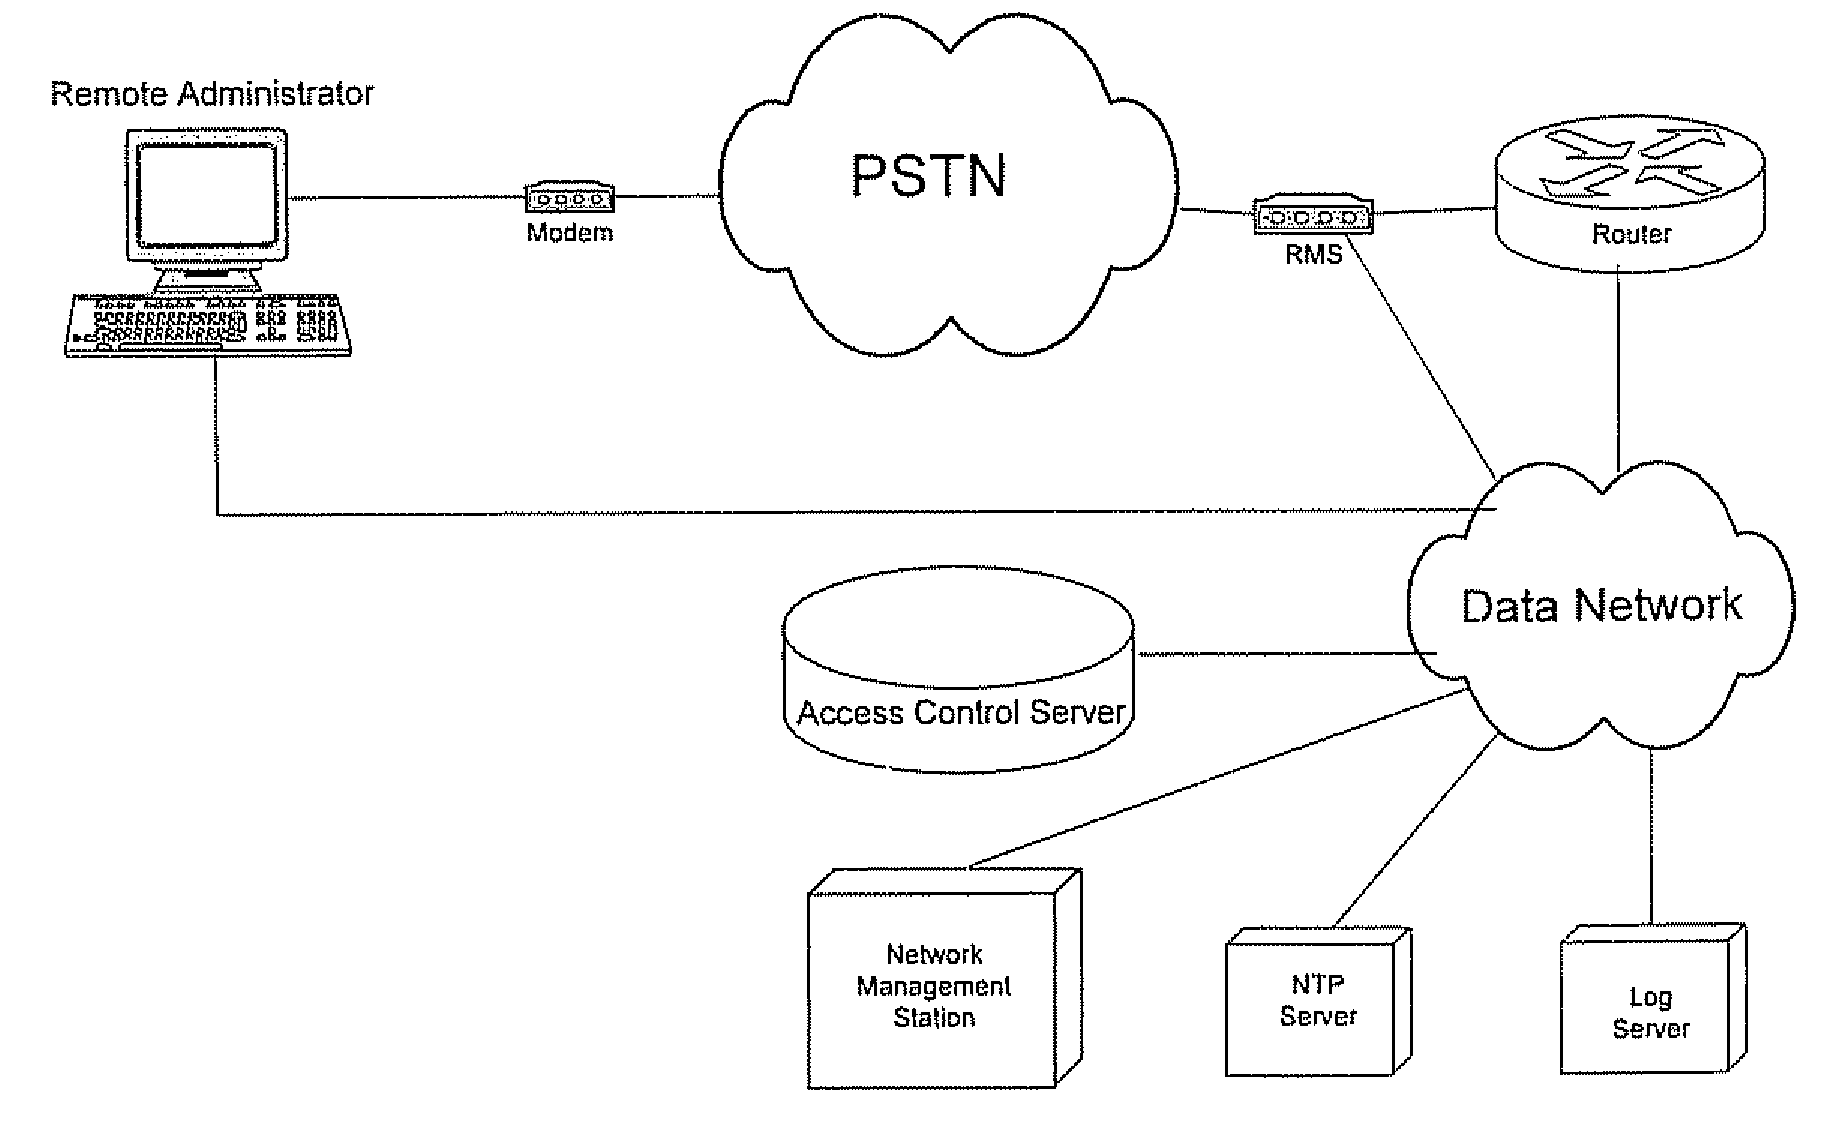 Out-of-band remote management station